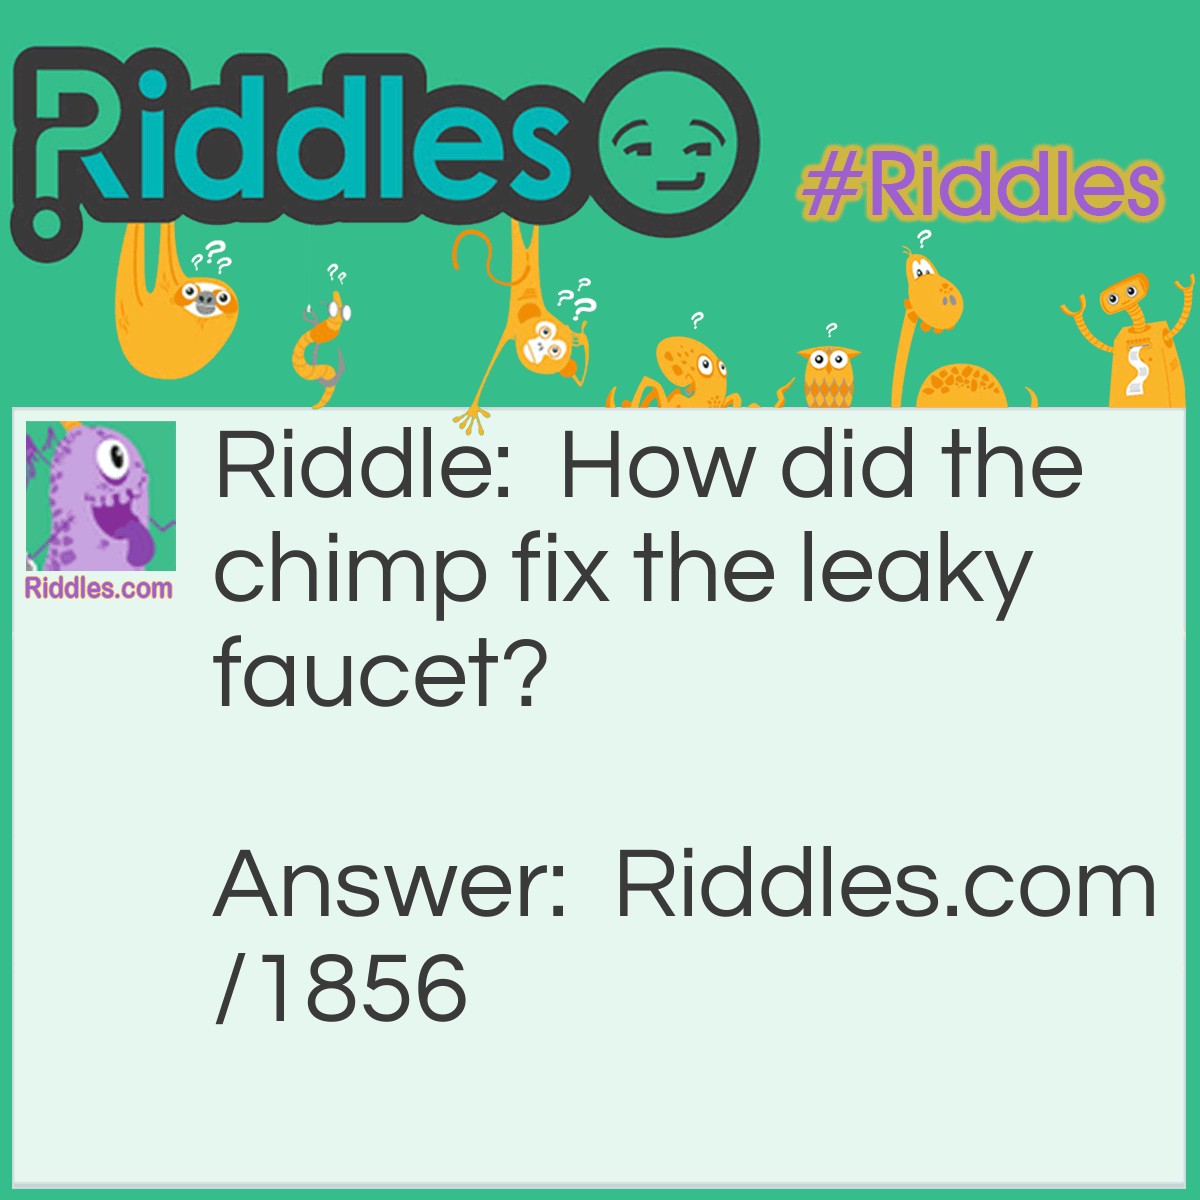 Riddle: How did the chimp fix the leaky faucet? Answer: With a monkey wrench.